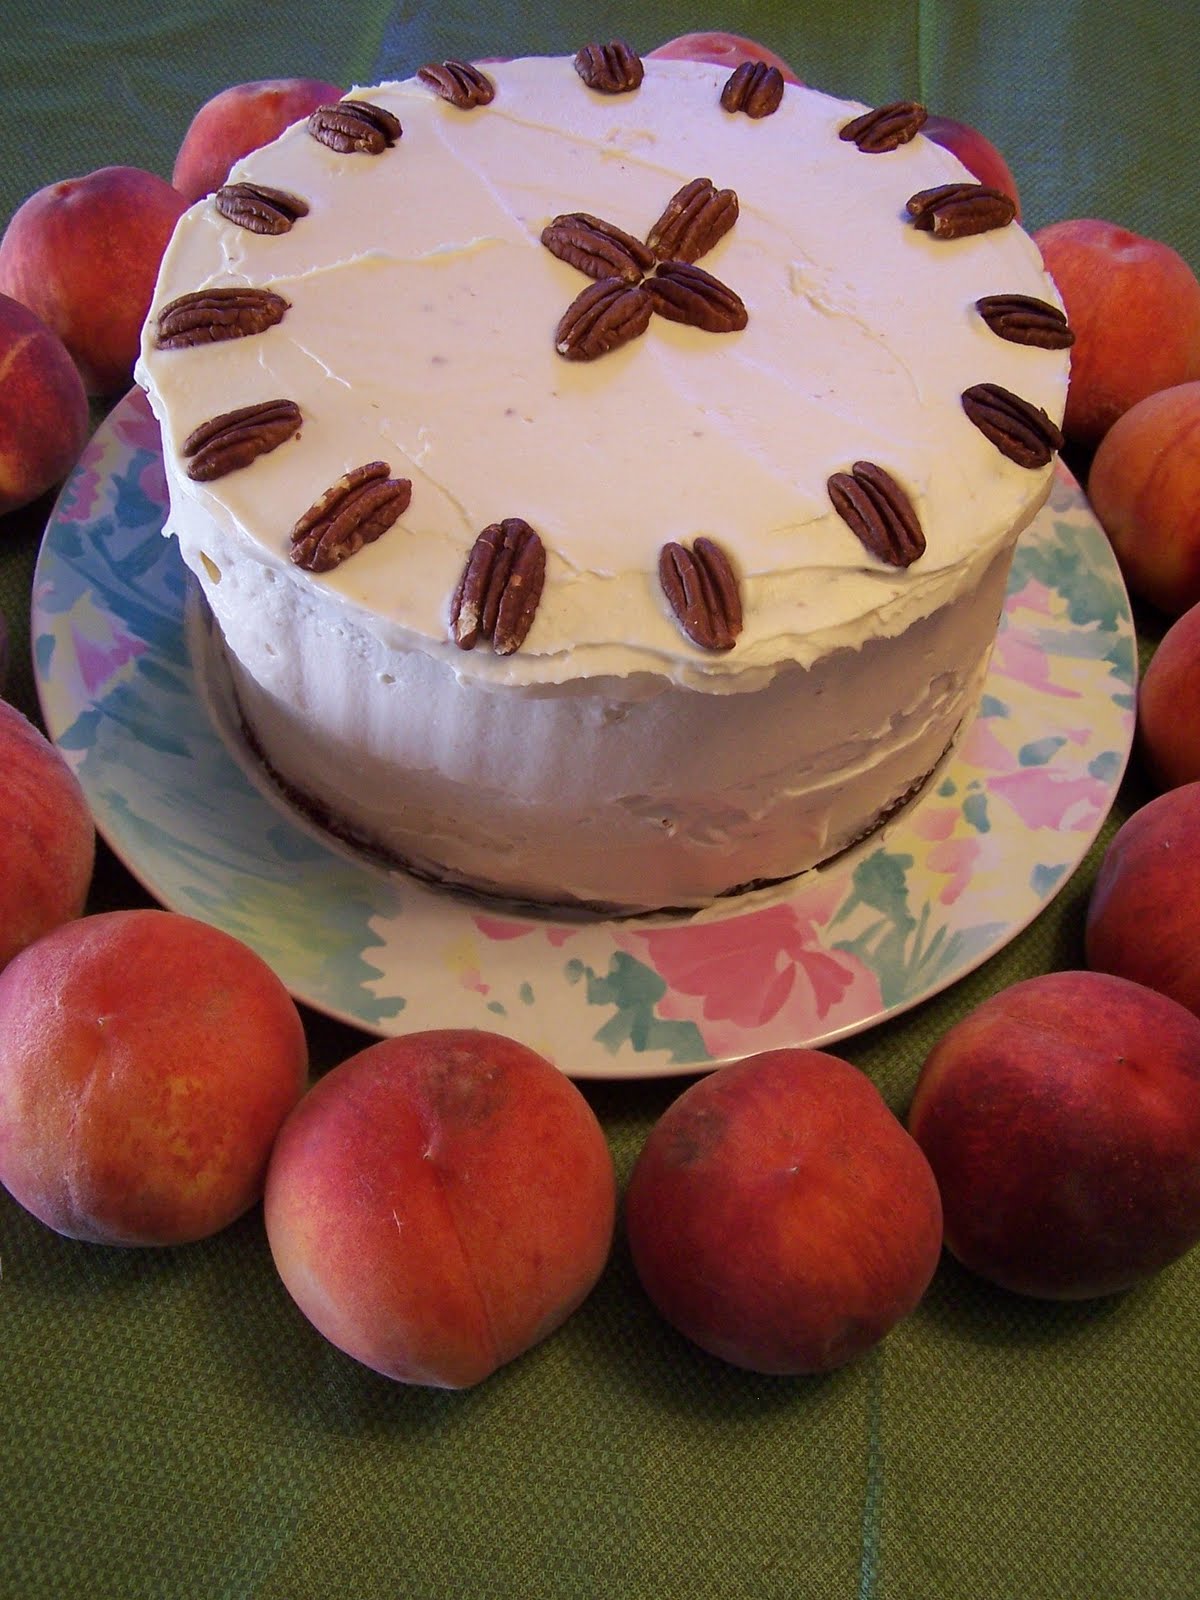 Family Chefmate: Peach Cake With Dulce de Leche Frosting